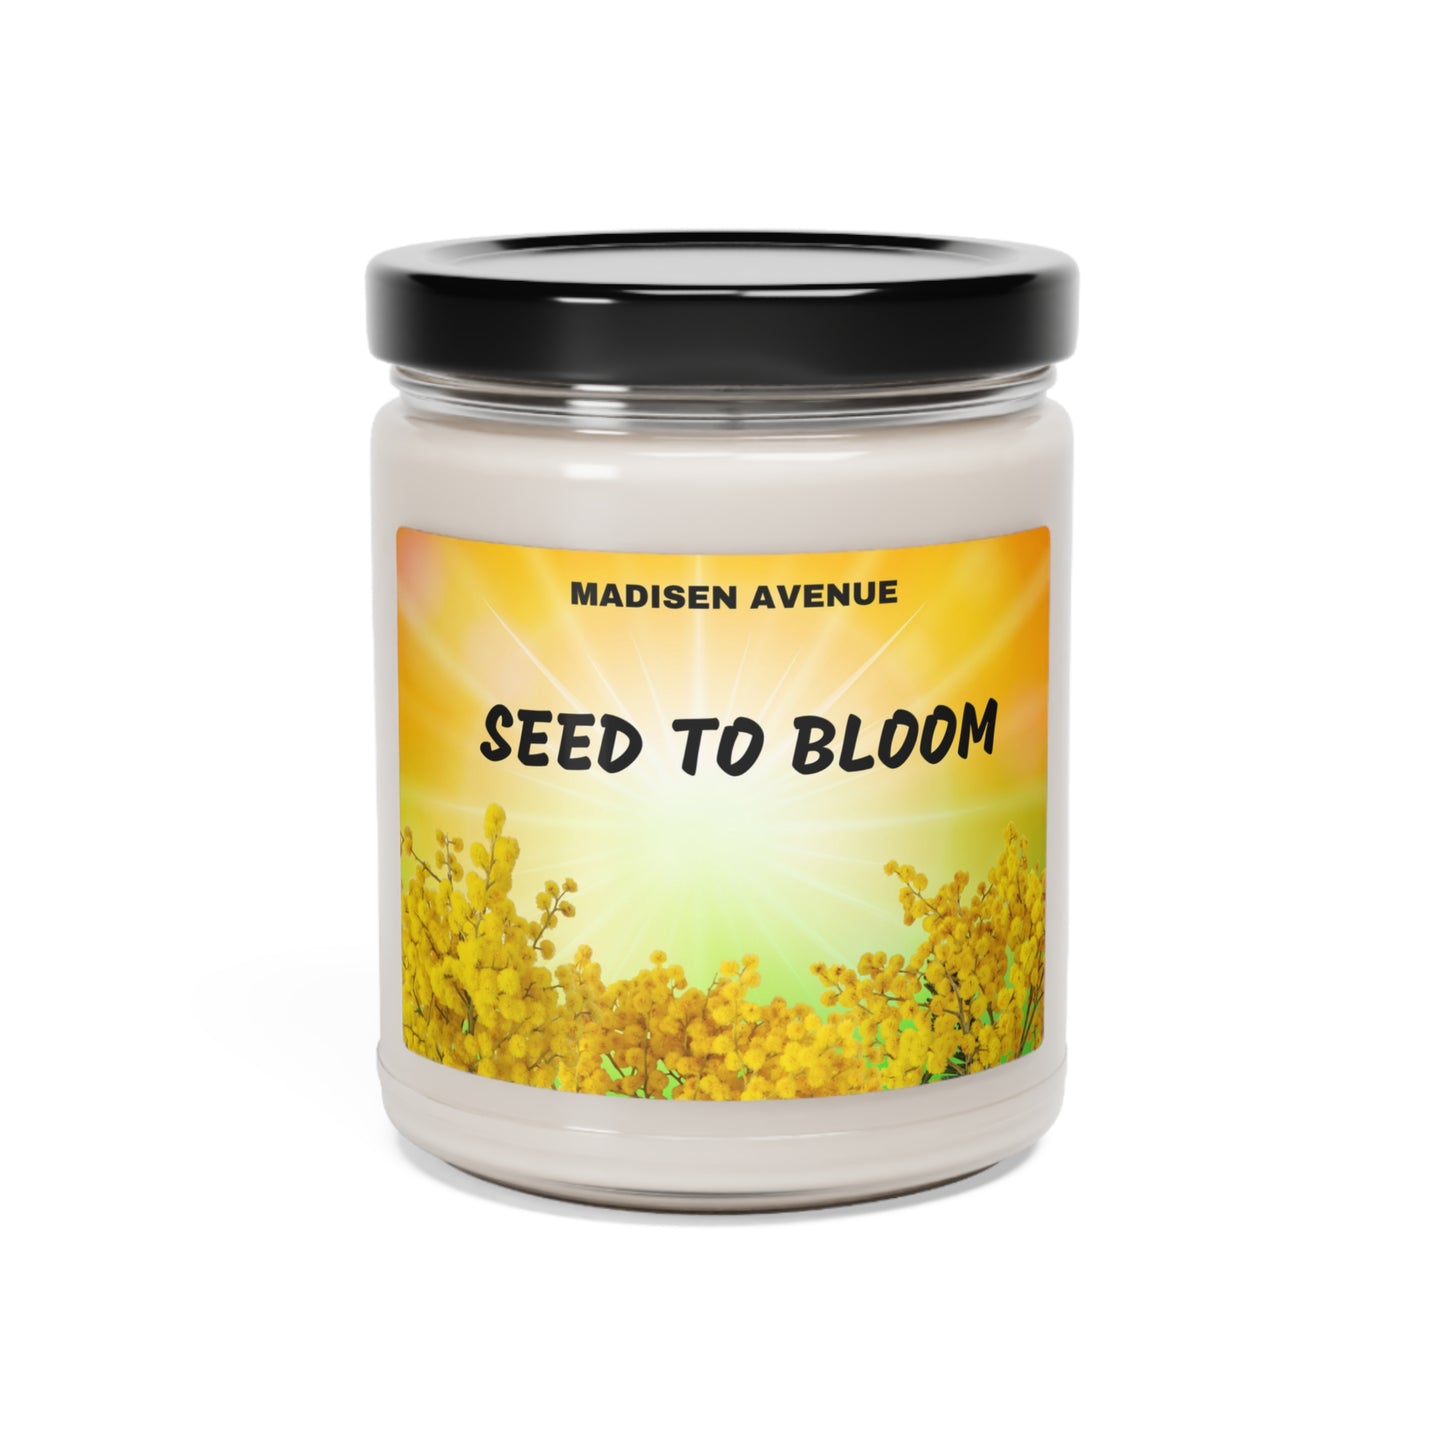 Madisen Avenue Seed to Bloom - Scented Soy Candle, 9oz